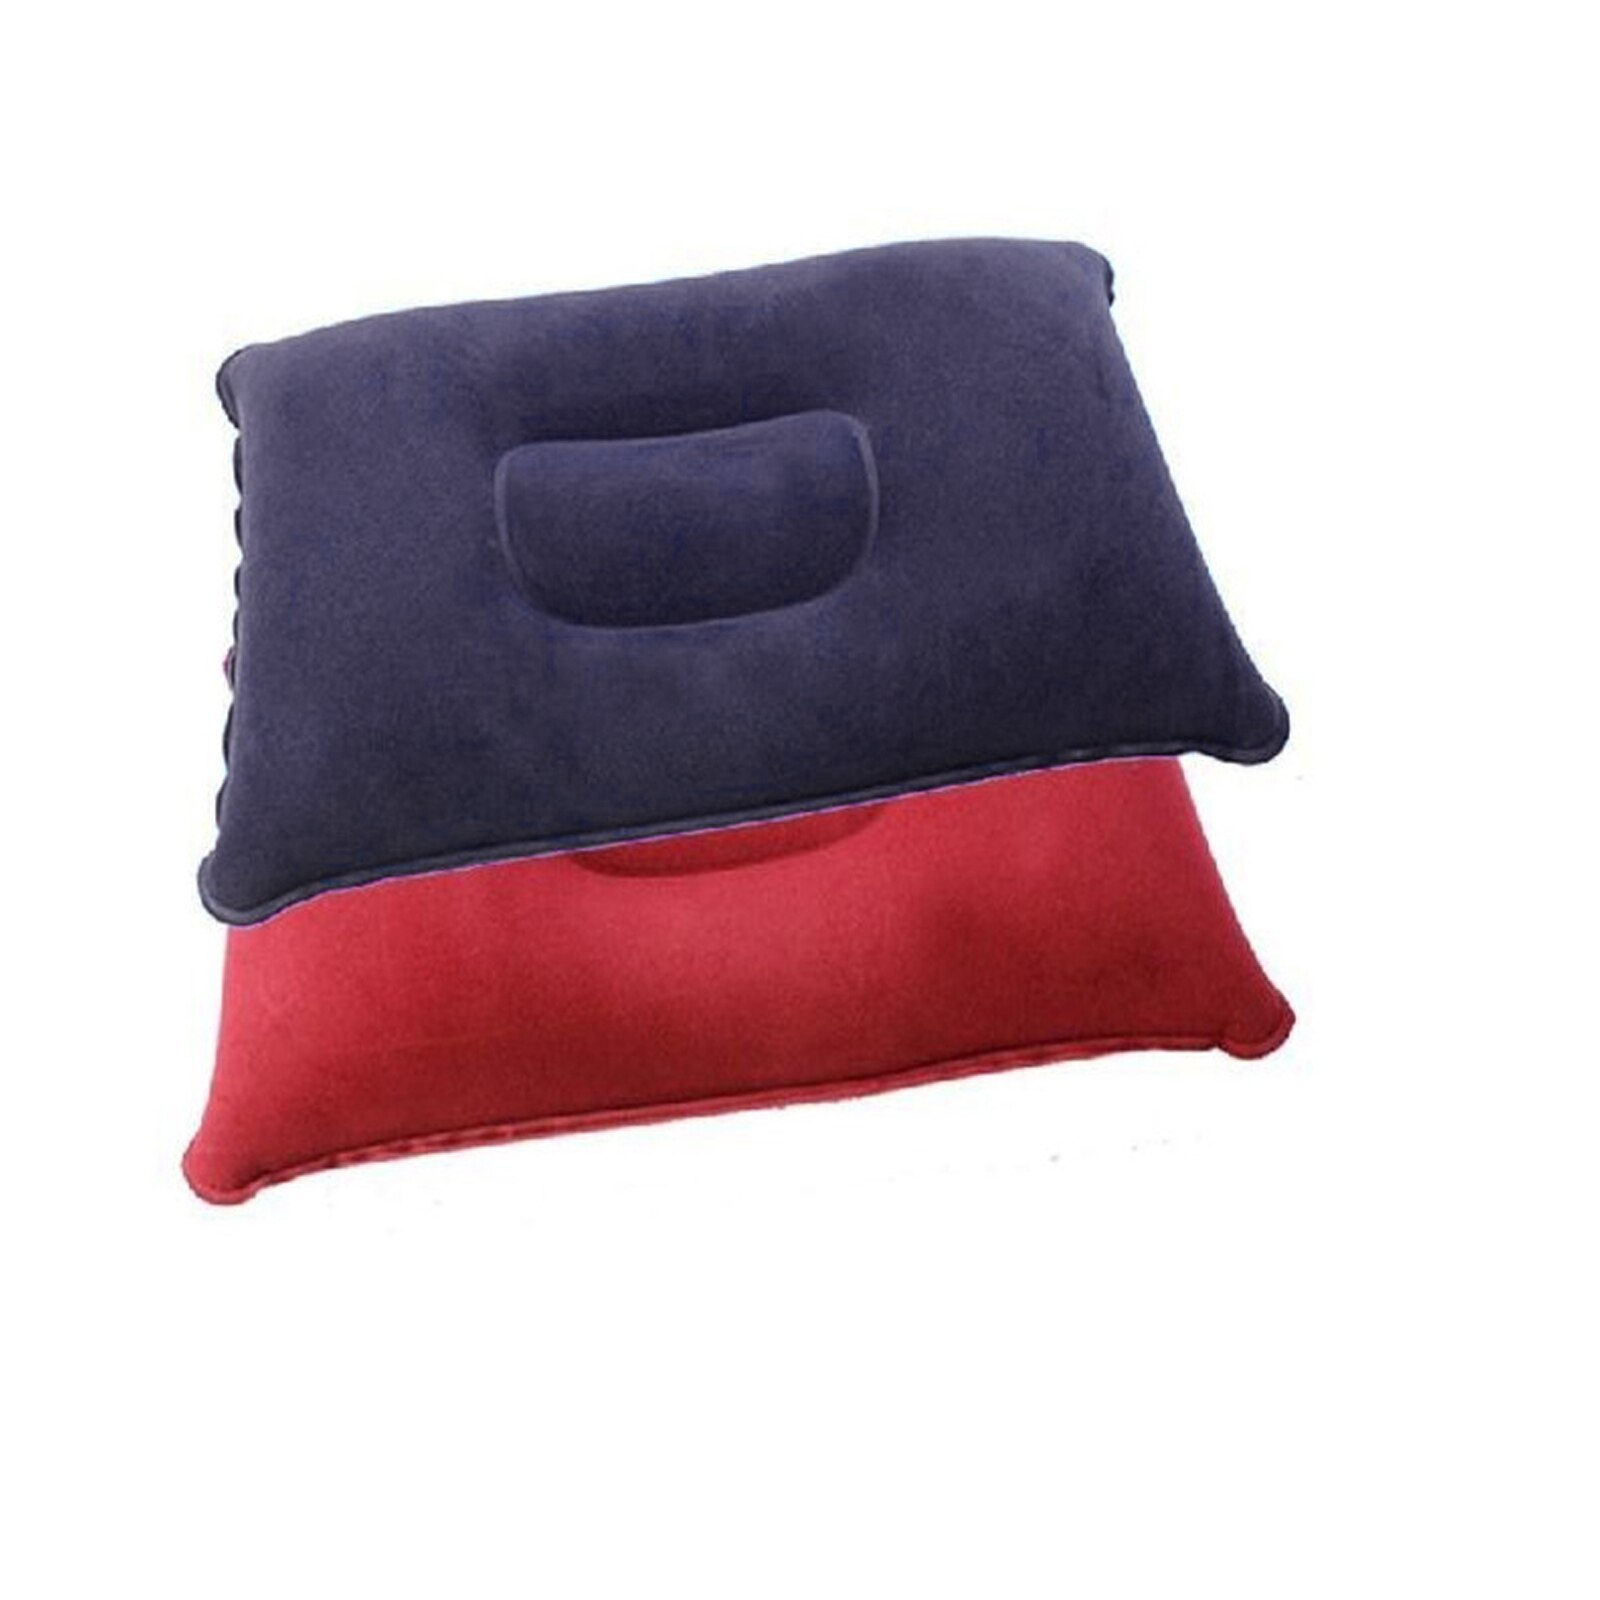 Outdoor Inflatable Travel Neck Office Cushion Head Rest Support Care Decorative Travel Pillow Air Cushion Camping Sleeping Bag